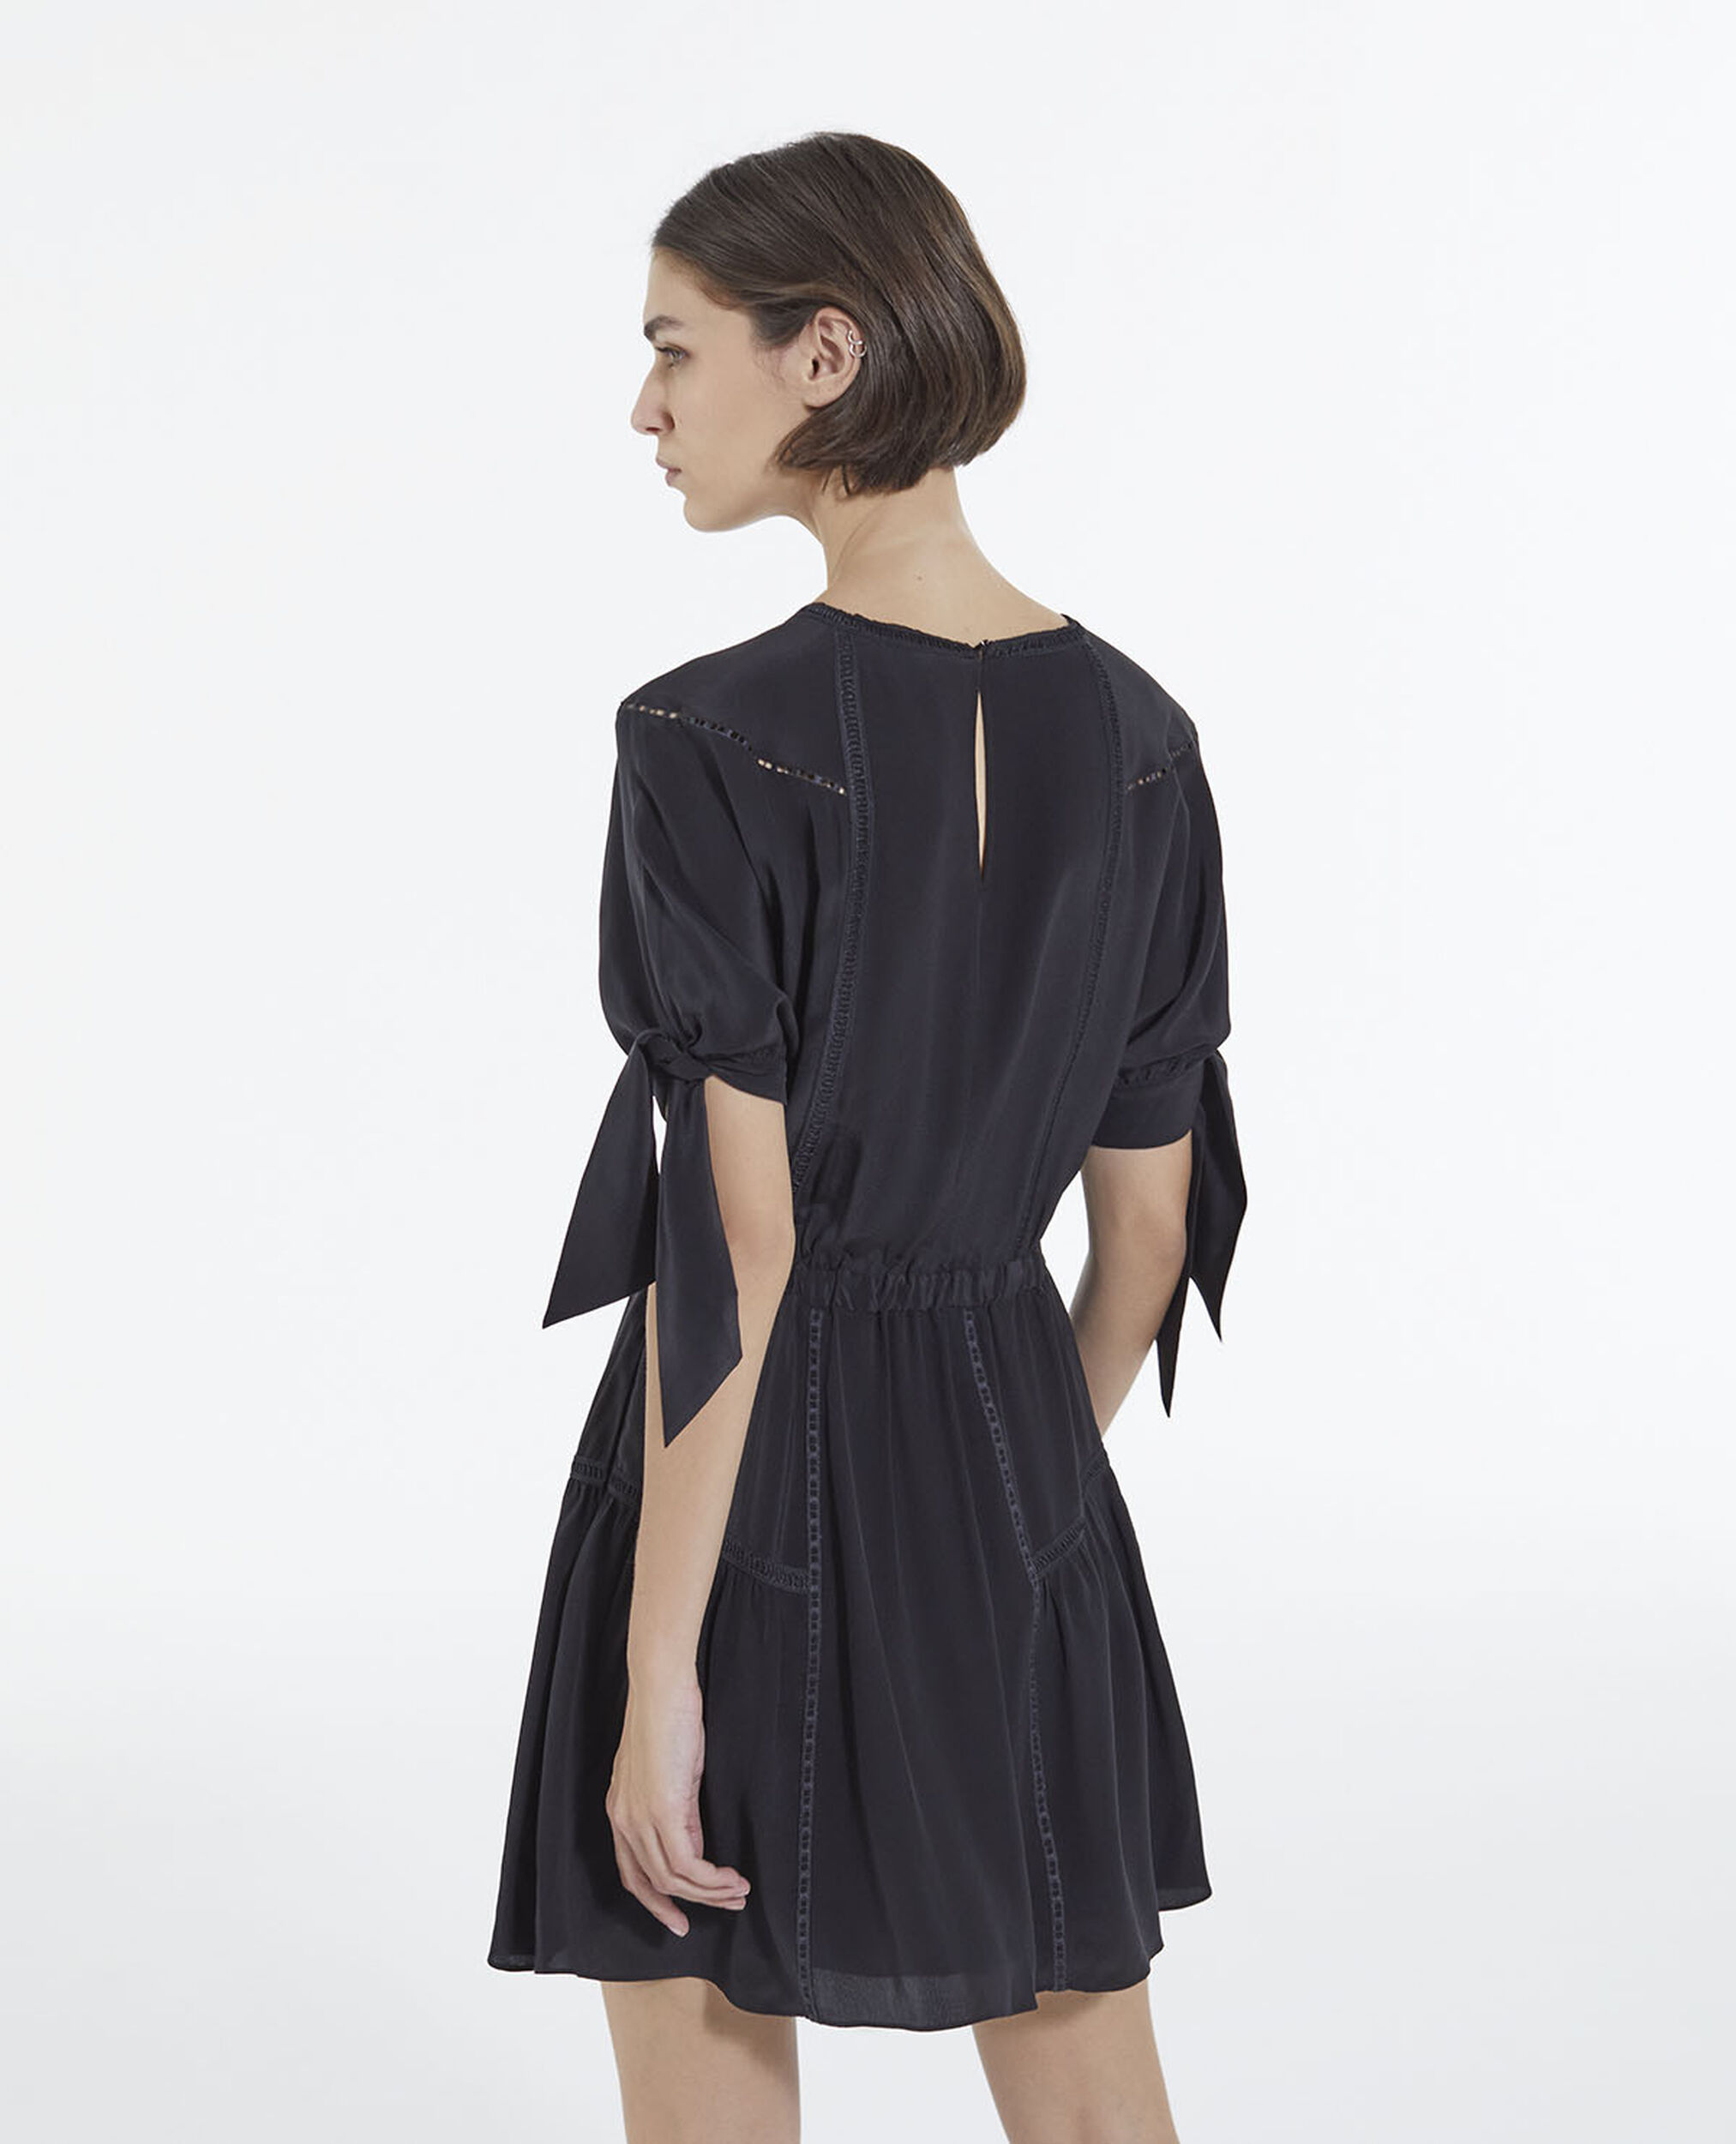 Short black silk dress with knotted sleeves | The Kooples